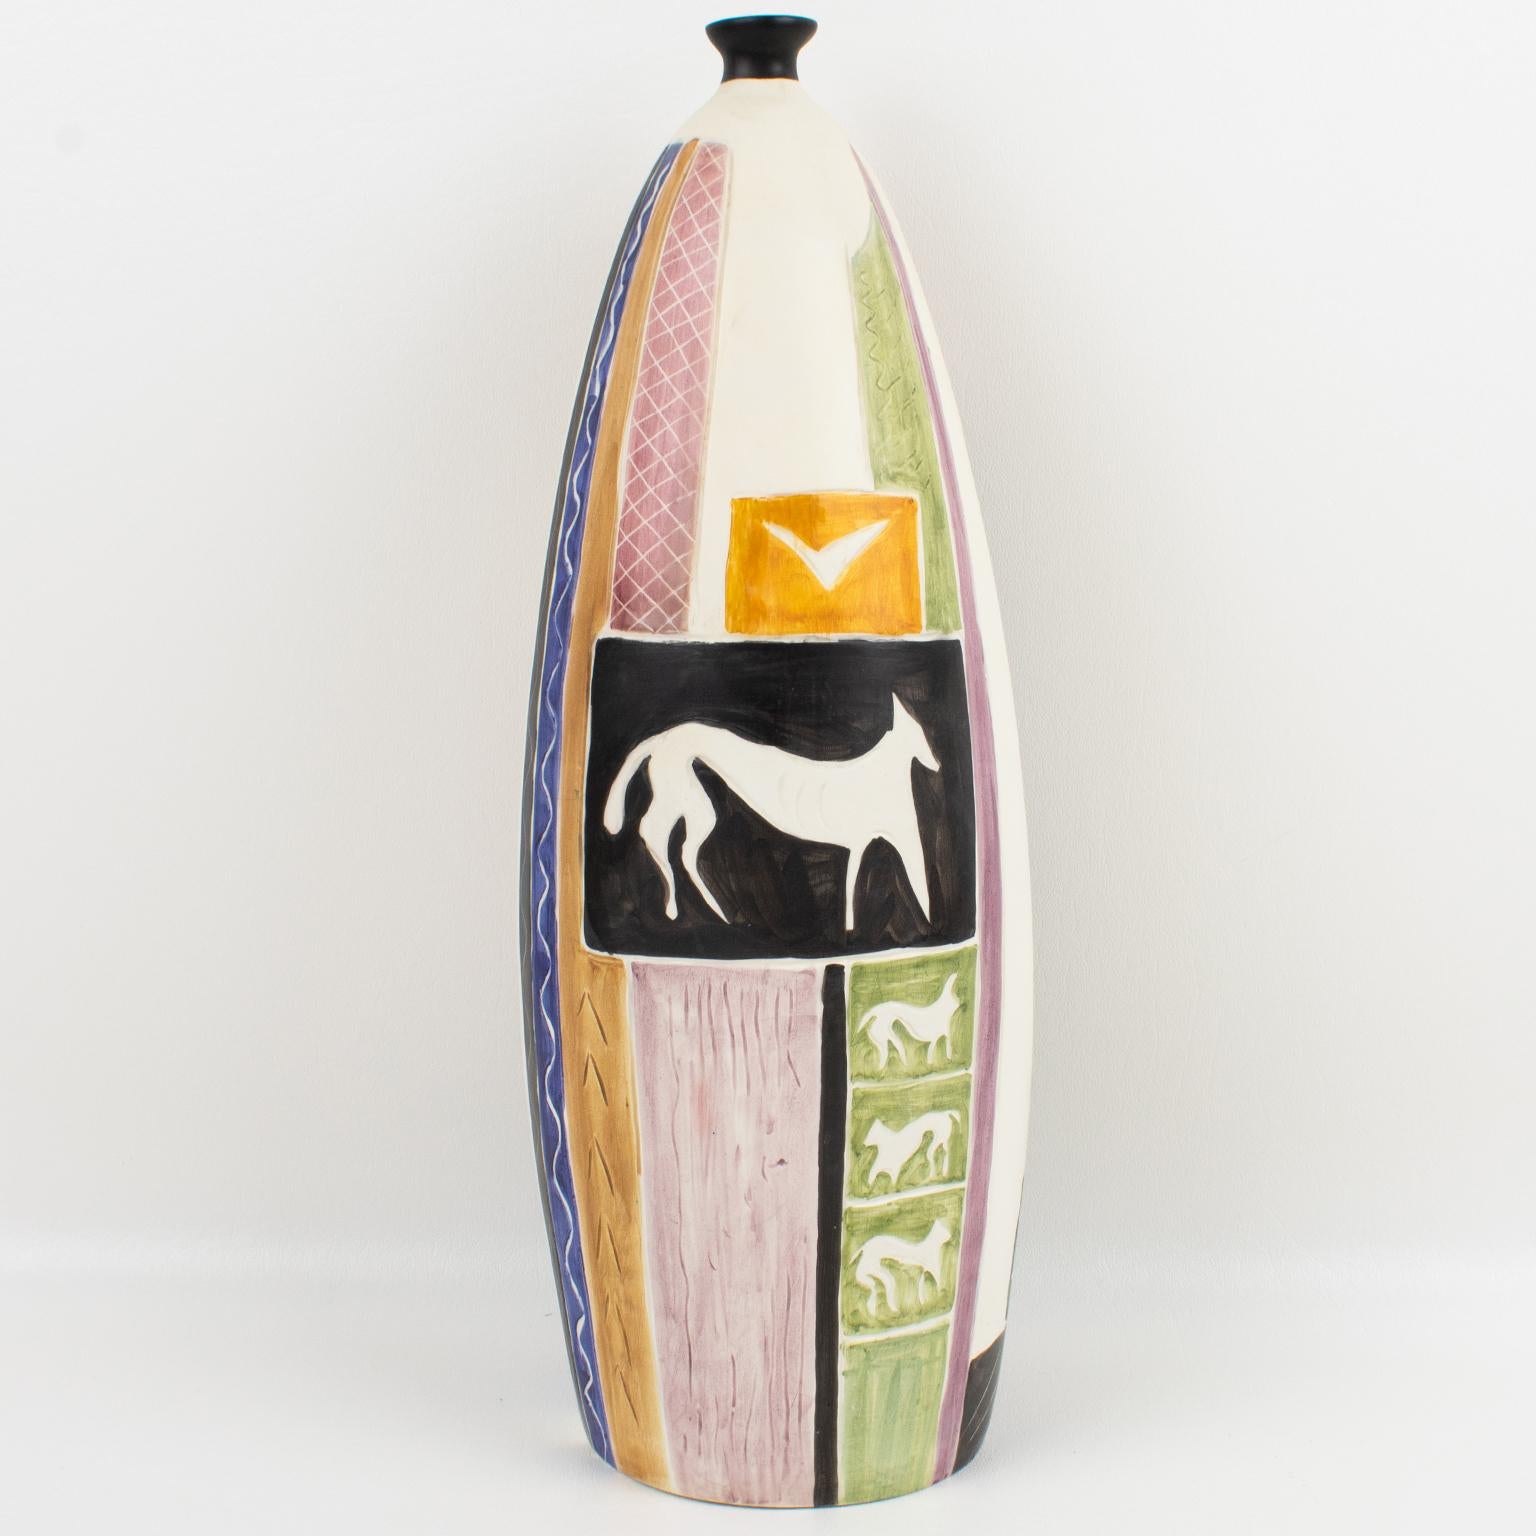 Luigi Carron designed this stunning Mid-Century Modern ceramic vase for Alcyone of Marostica, Italy, in the 1950s. The chunky amphora shape has hand-painted geometric and stylized animal designs. The design is different all around the vase. This